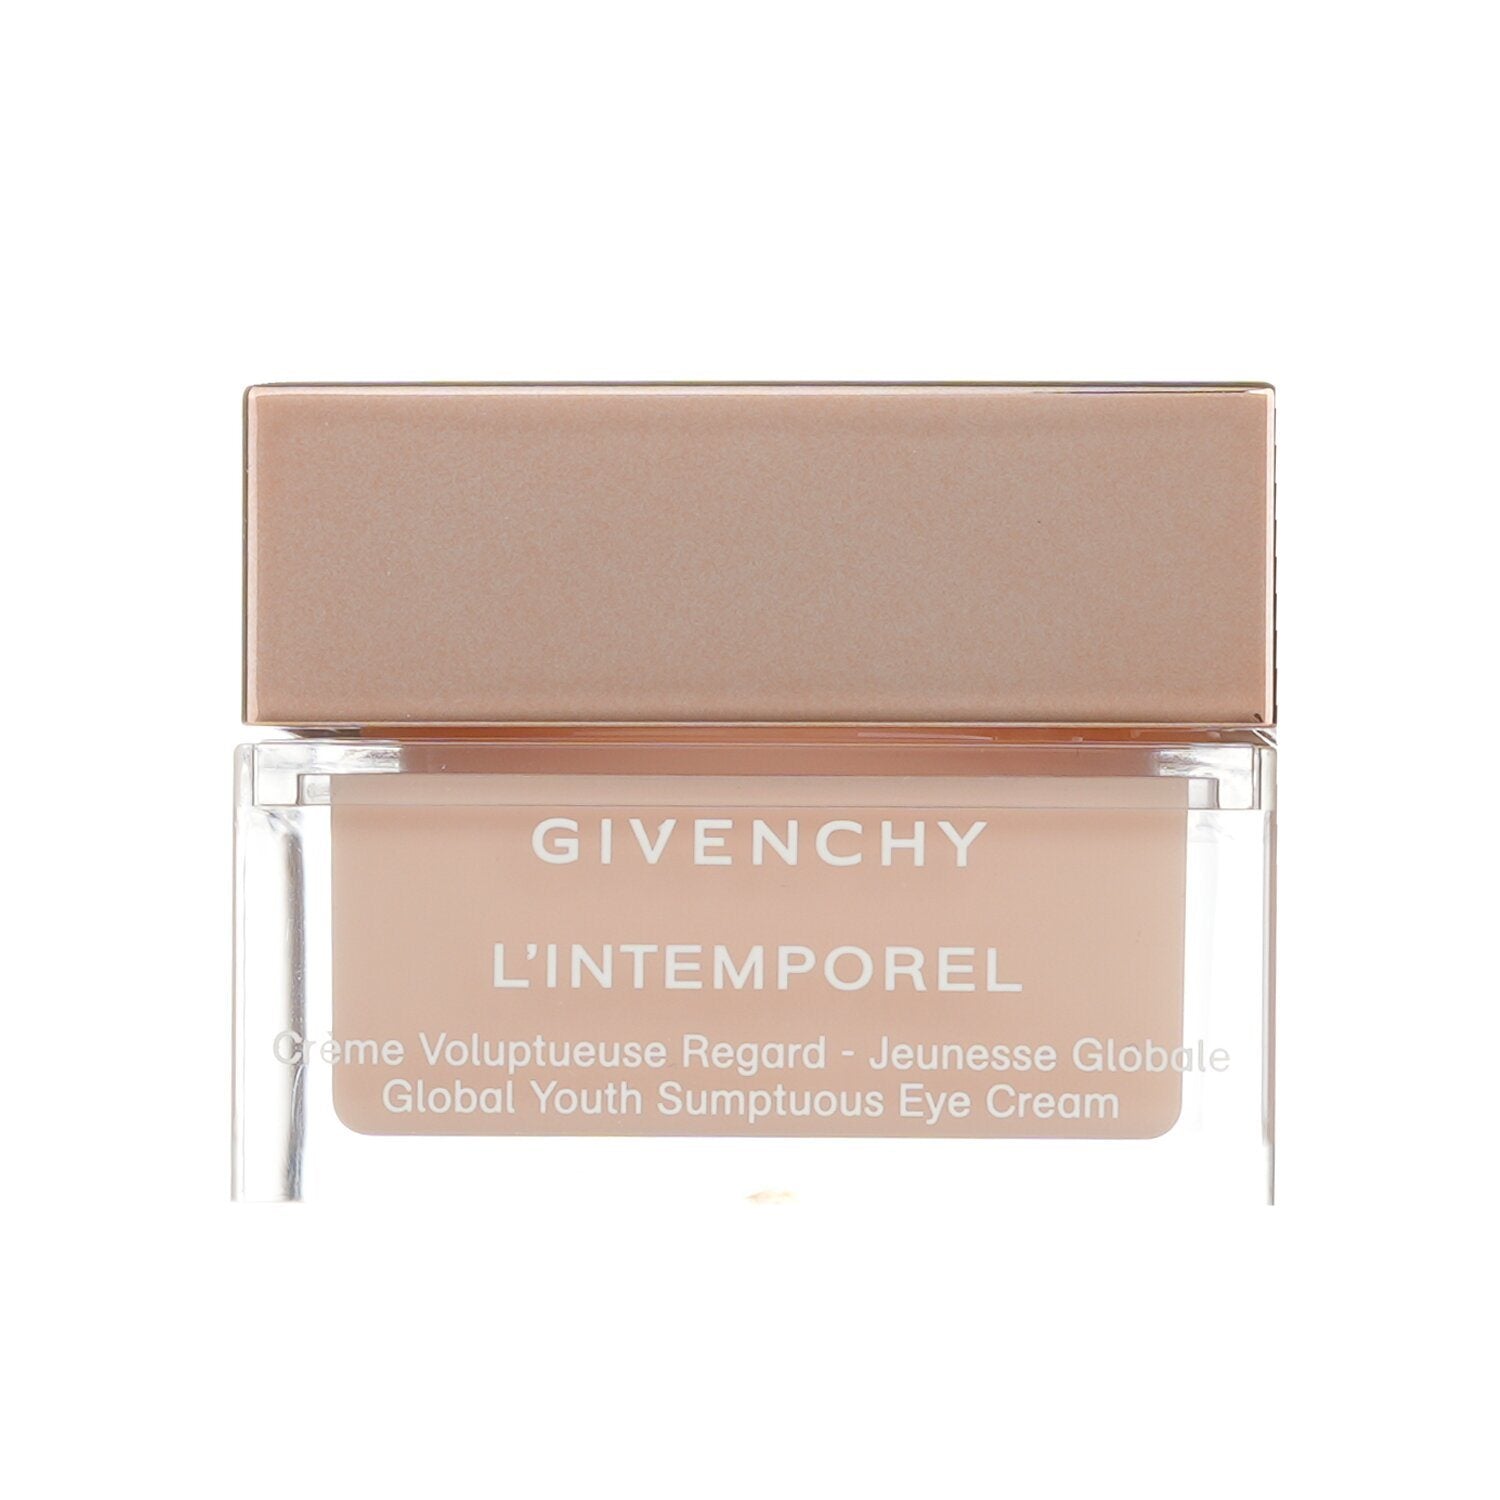 GIVENCHY - L'Intemporel Global Youth Sumptuous Eye Cream - 15ml/0.5oz~3P's Inclusive Beauty